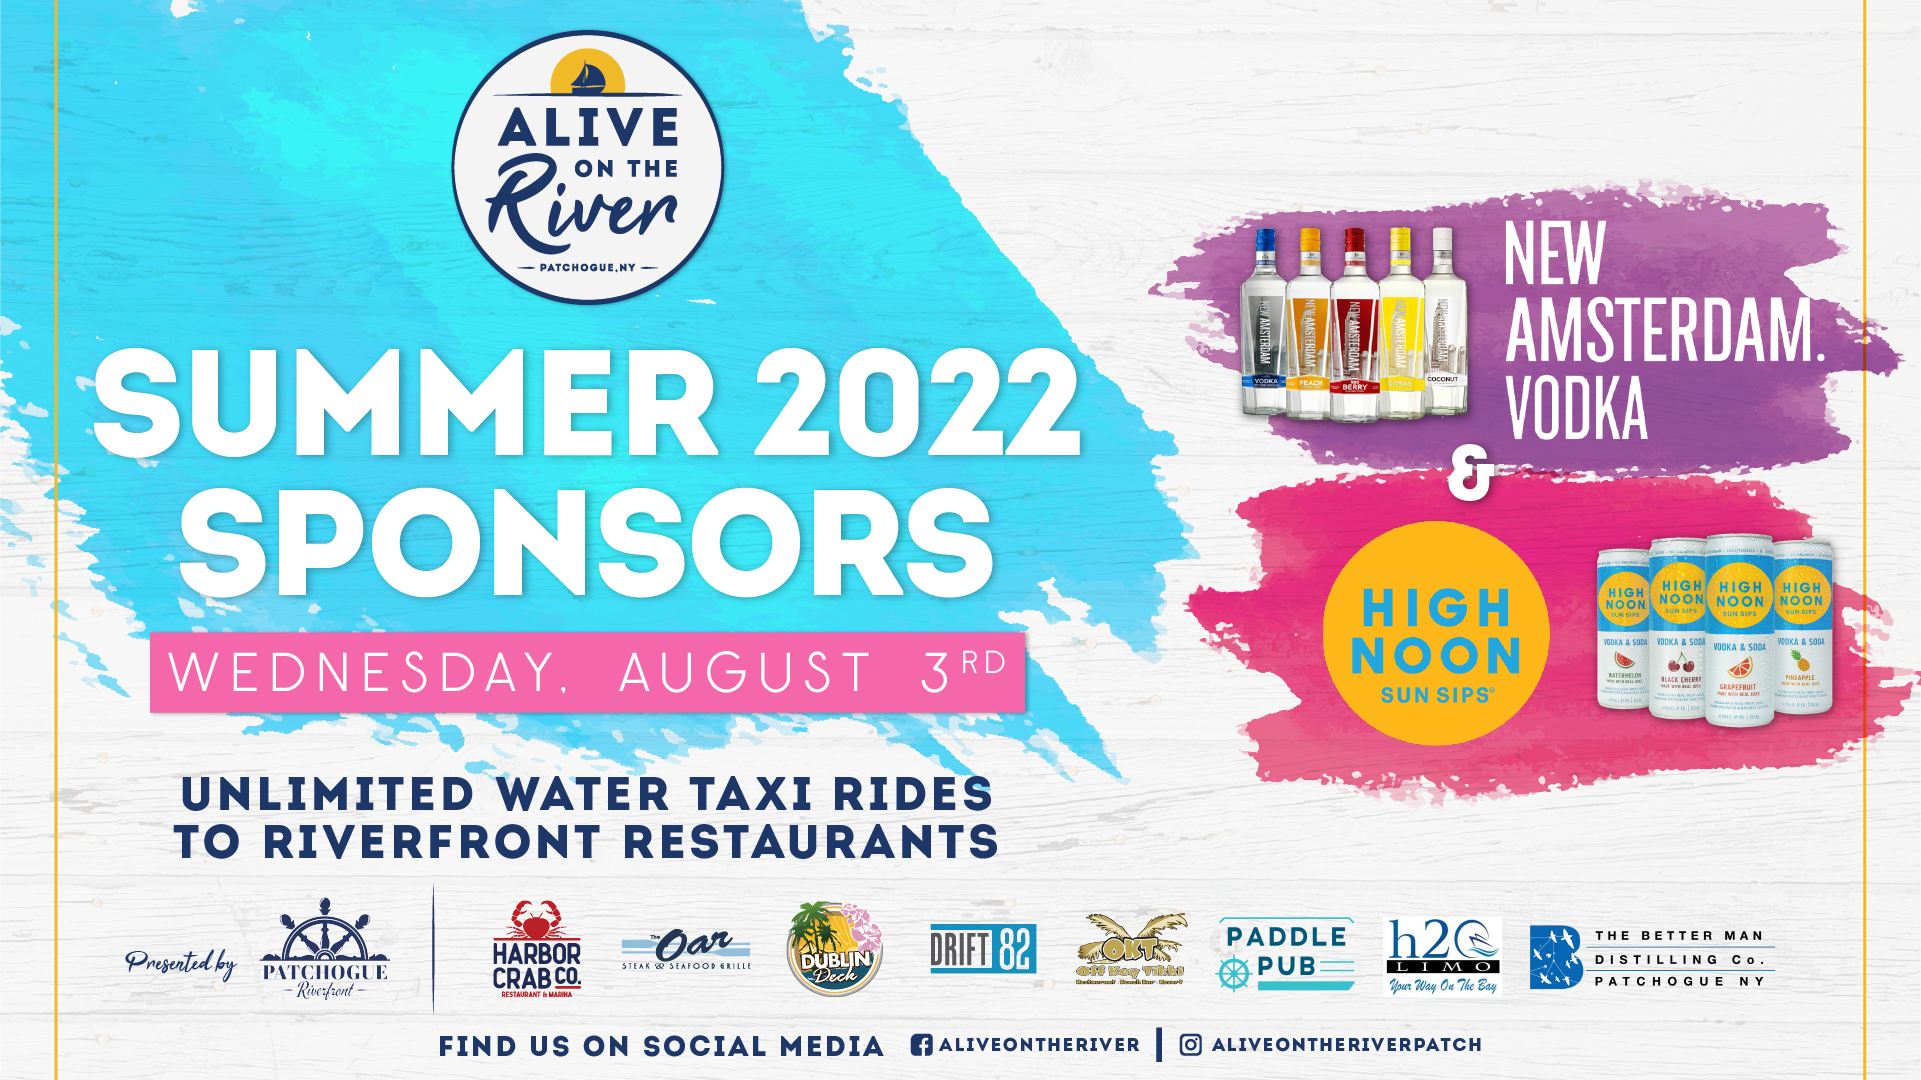 Flyer for Aug 3rd - Alive on The River